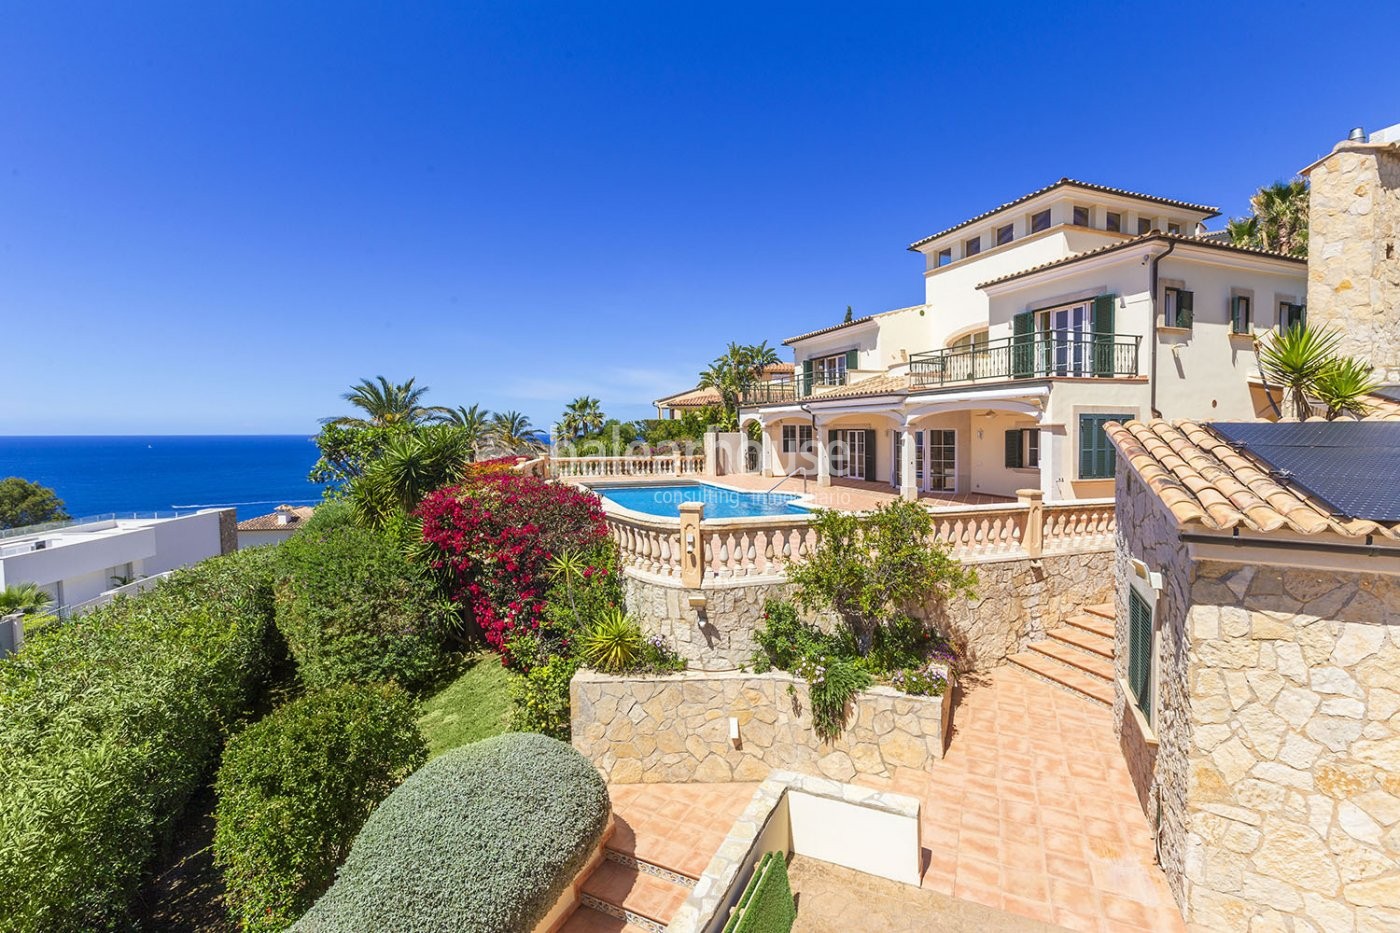 Mediterranean style villa with spectacular views in top location